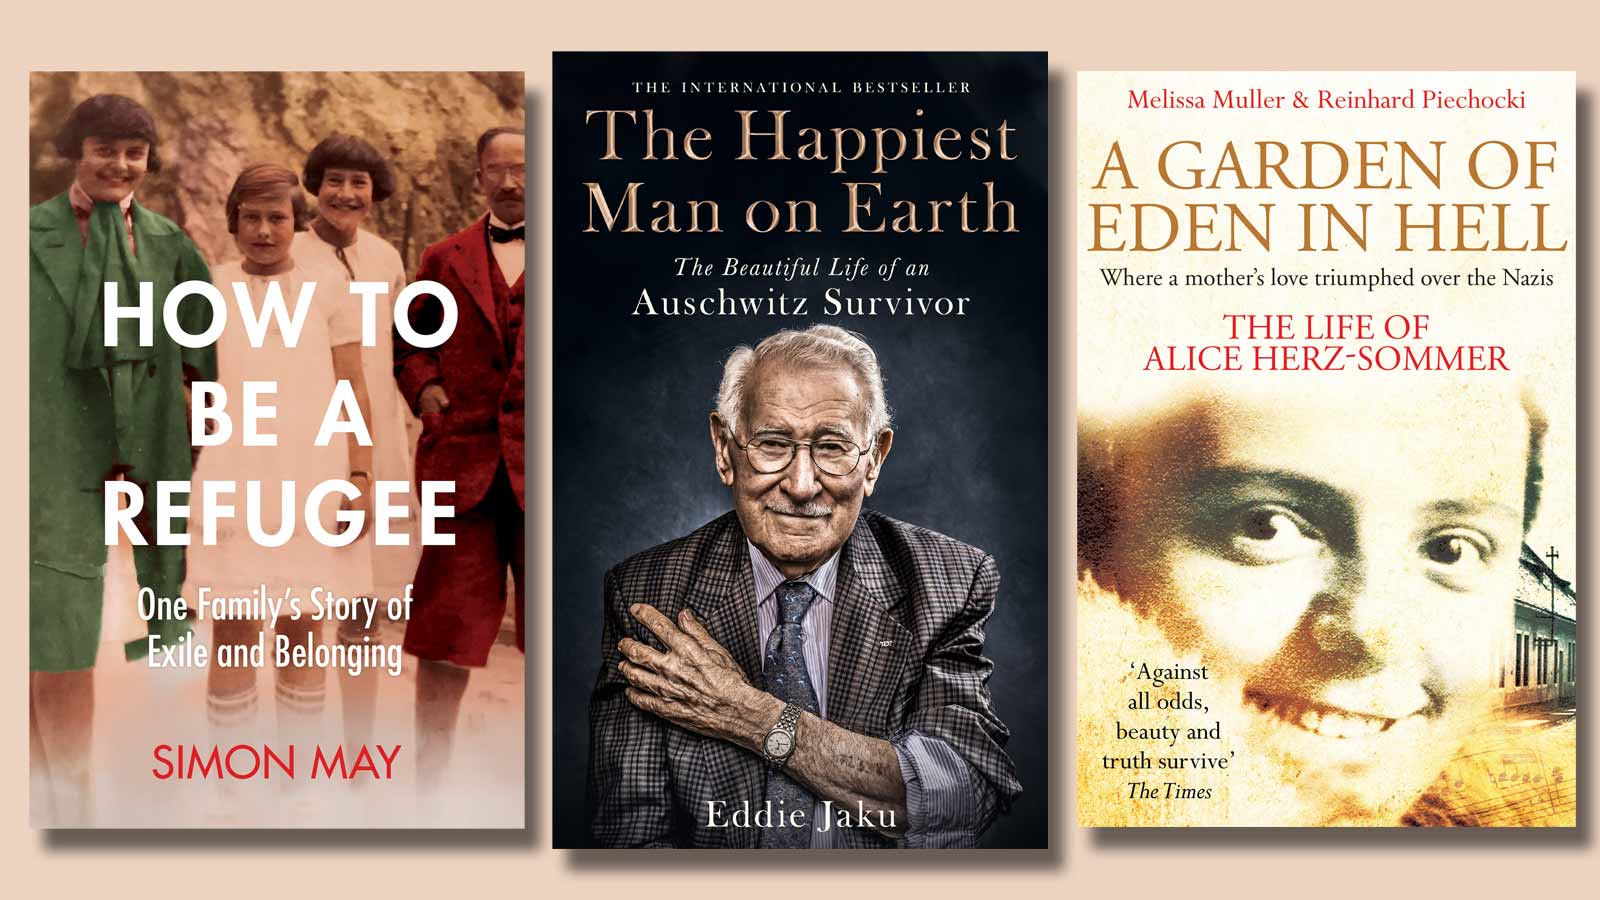 How to be a Refugee, The Happiest Man on Earth and A Garden of Eden in Hell book covers against a beige background